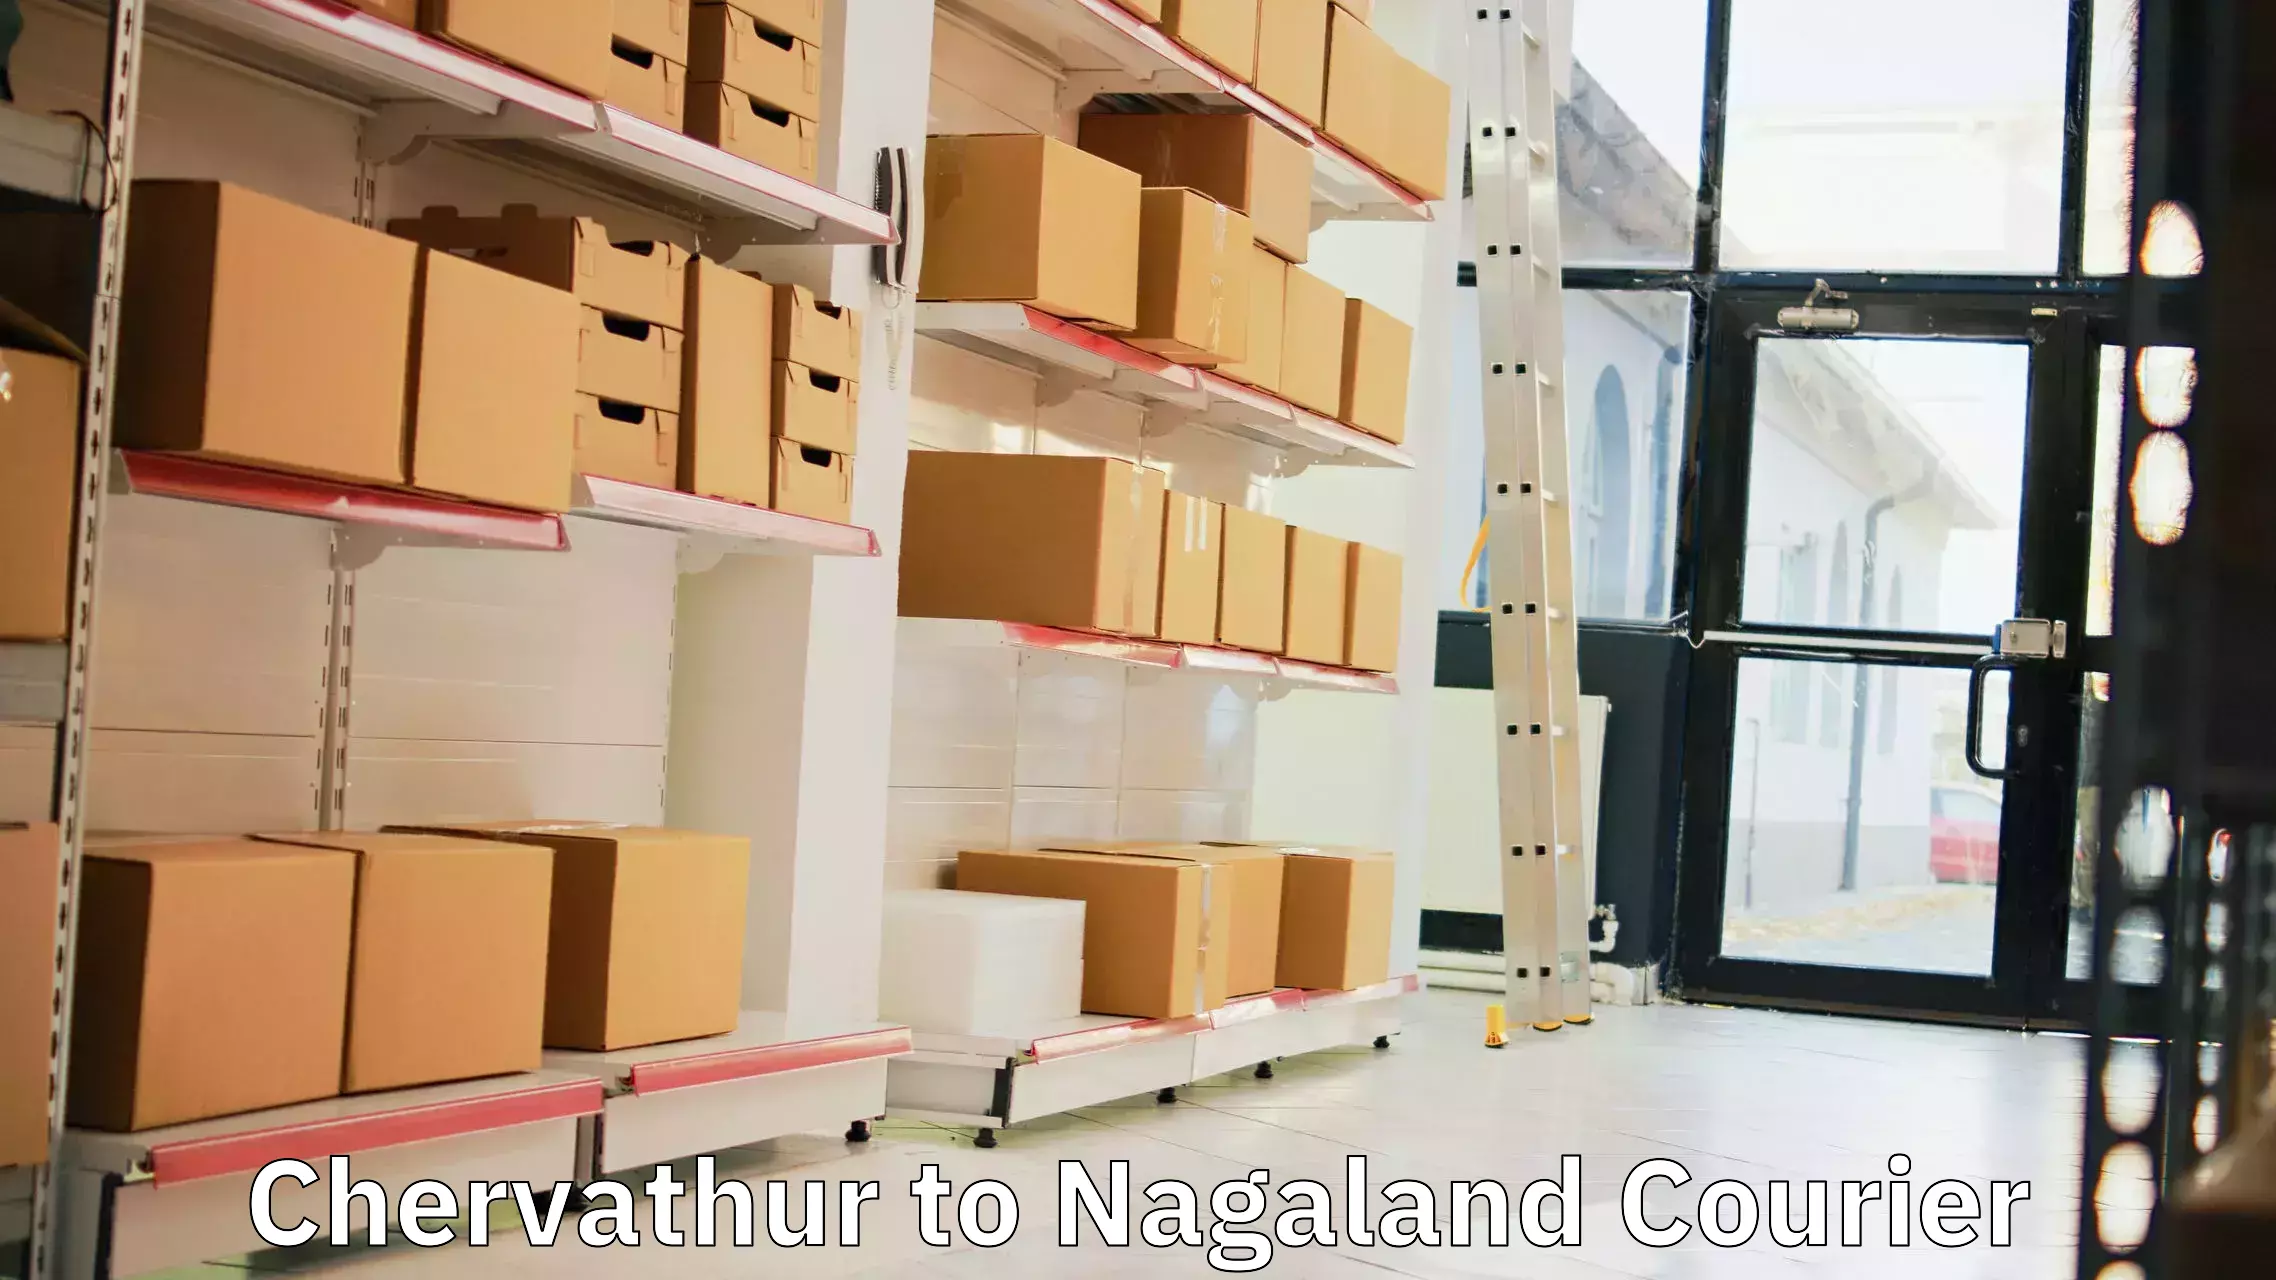 Customer-focused courier in Chervathur to Nagaland